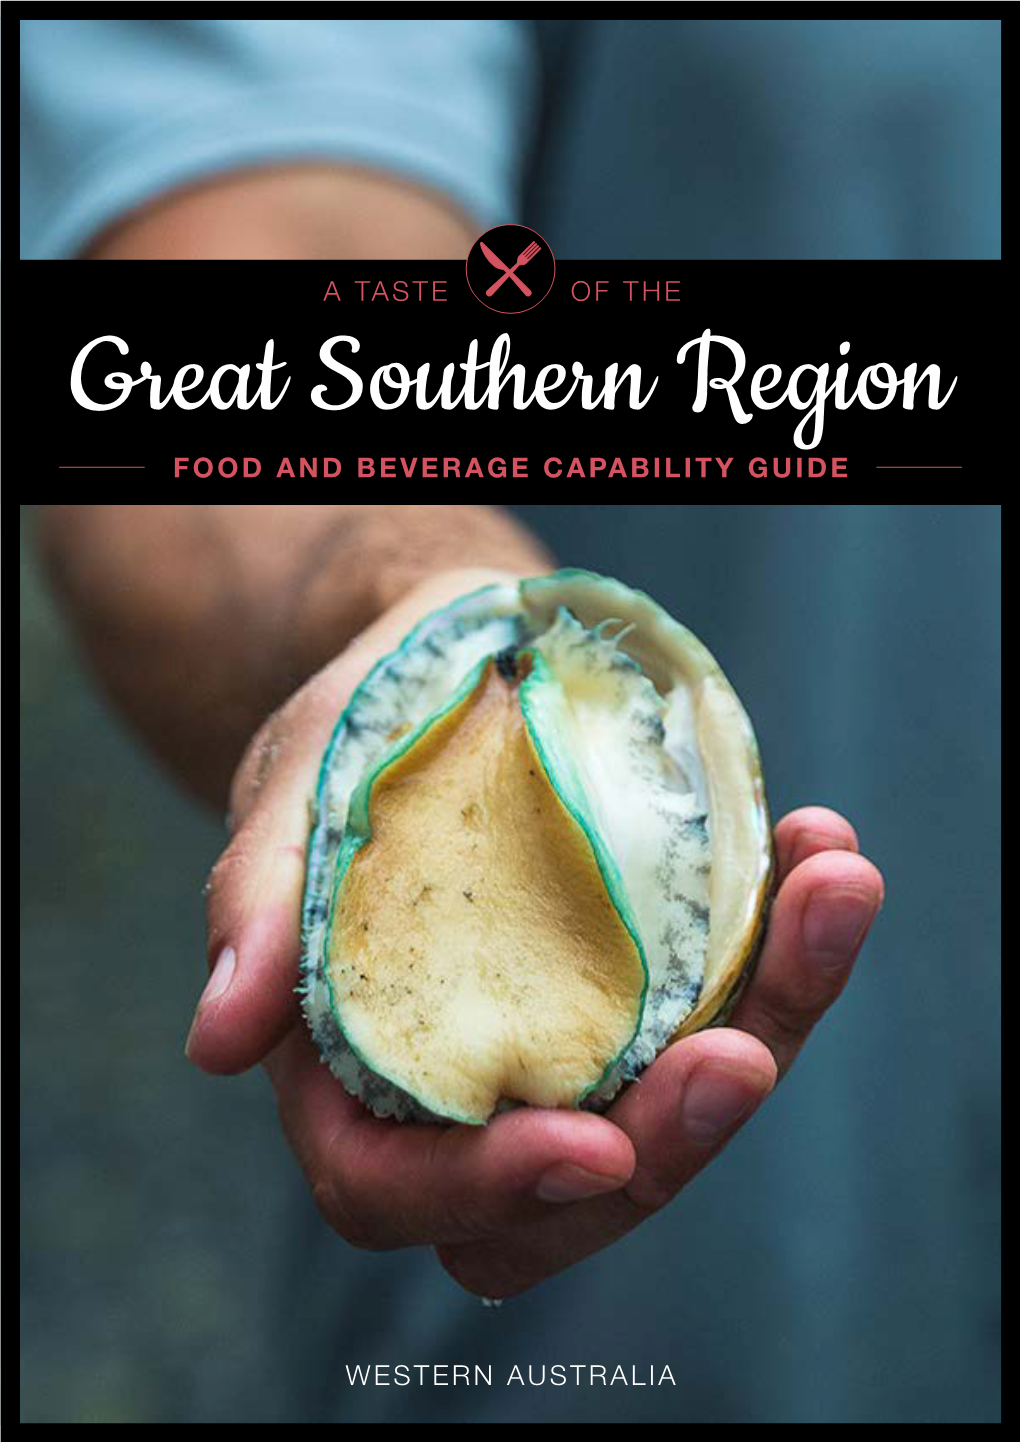 Great Southern Food and Beverage Capability Guide